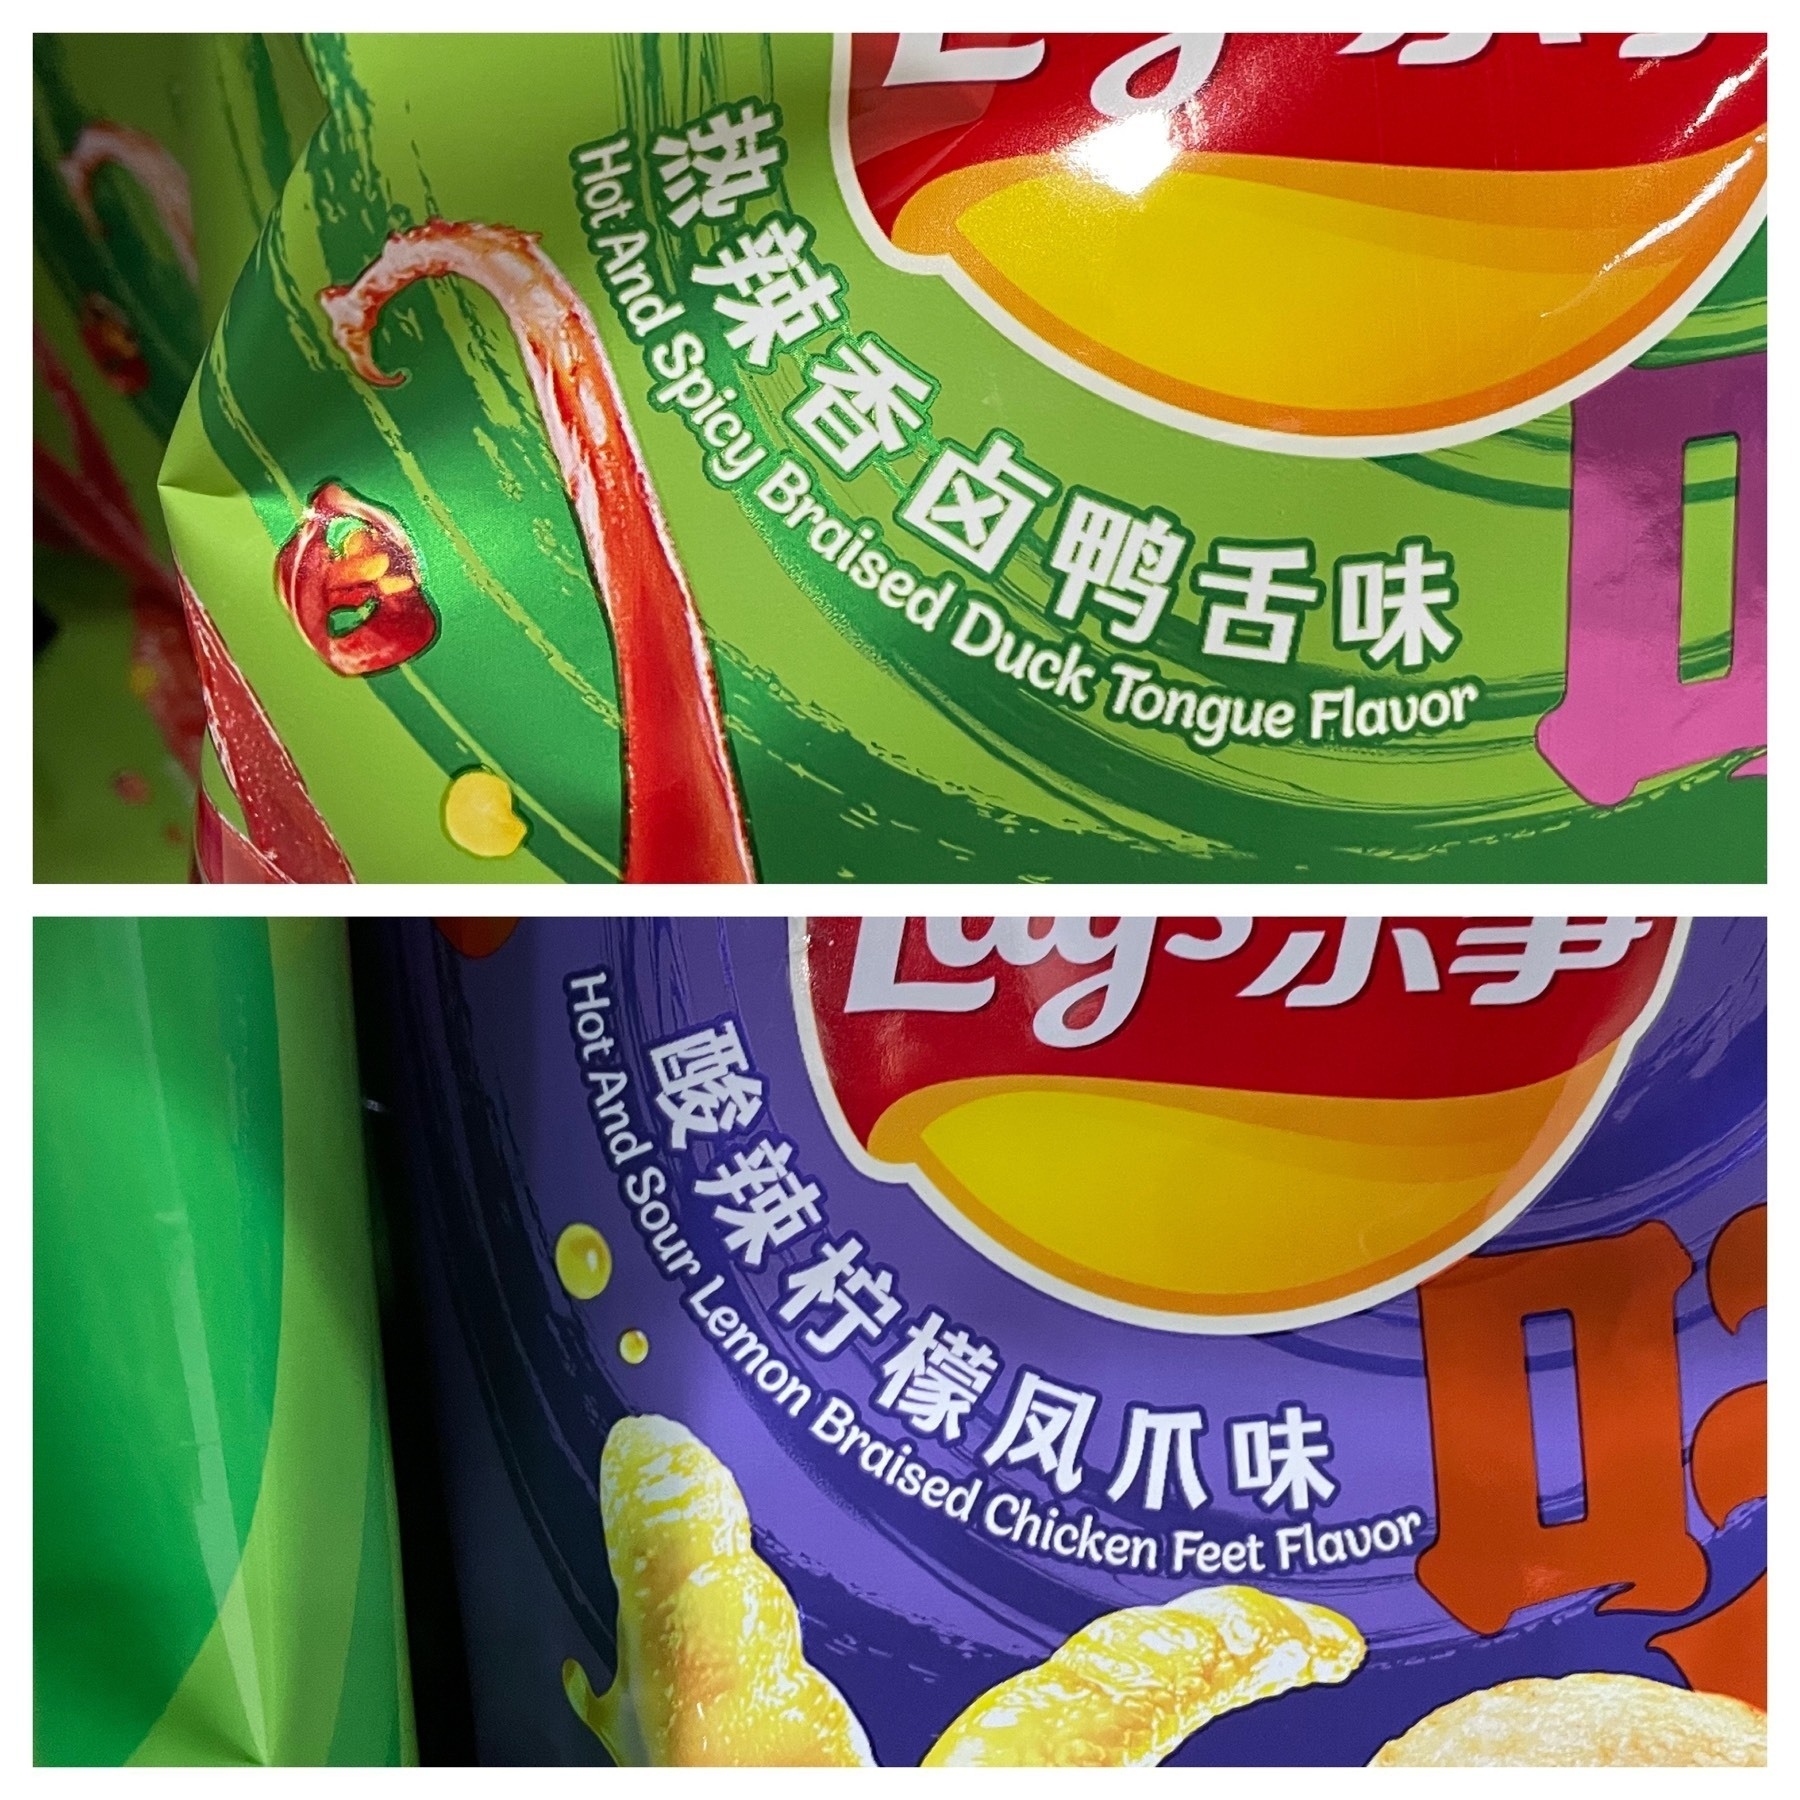 Chicken feet and duck tongue flavoured crisps in China